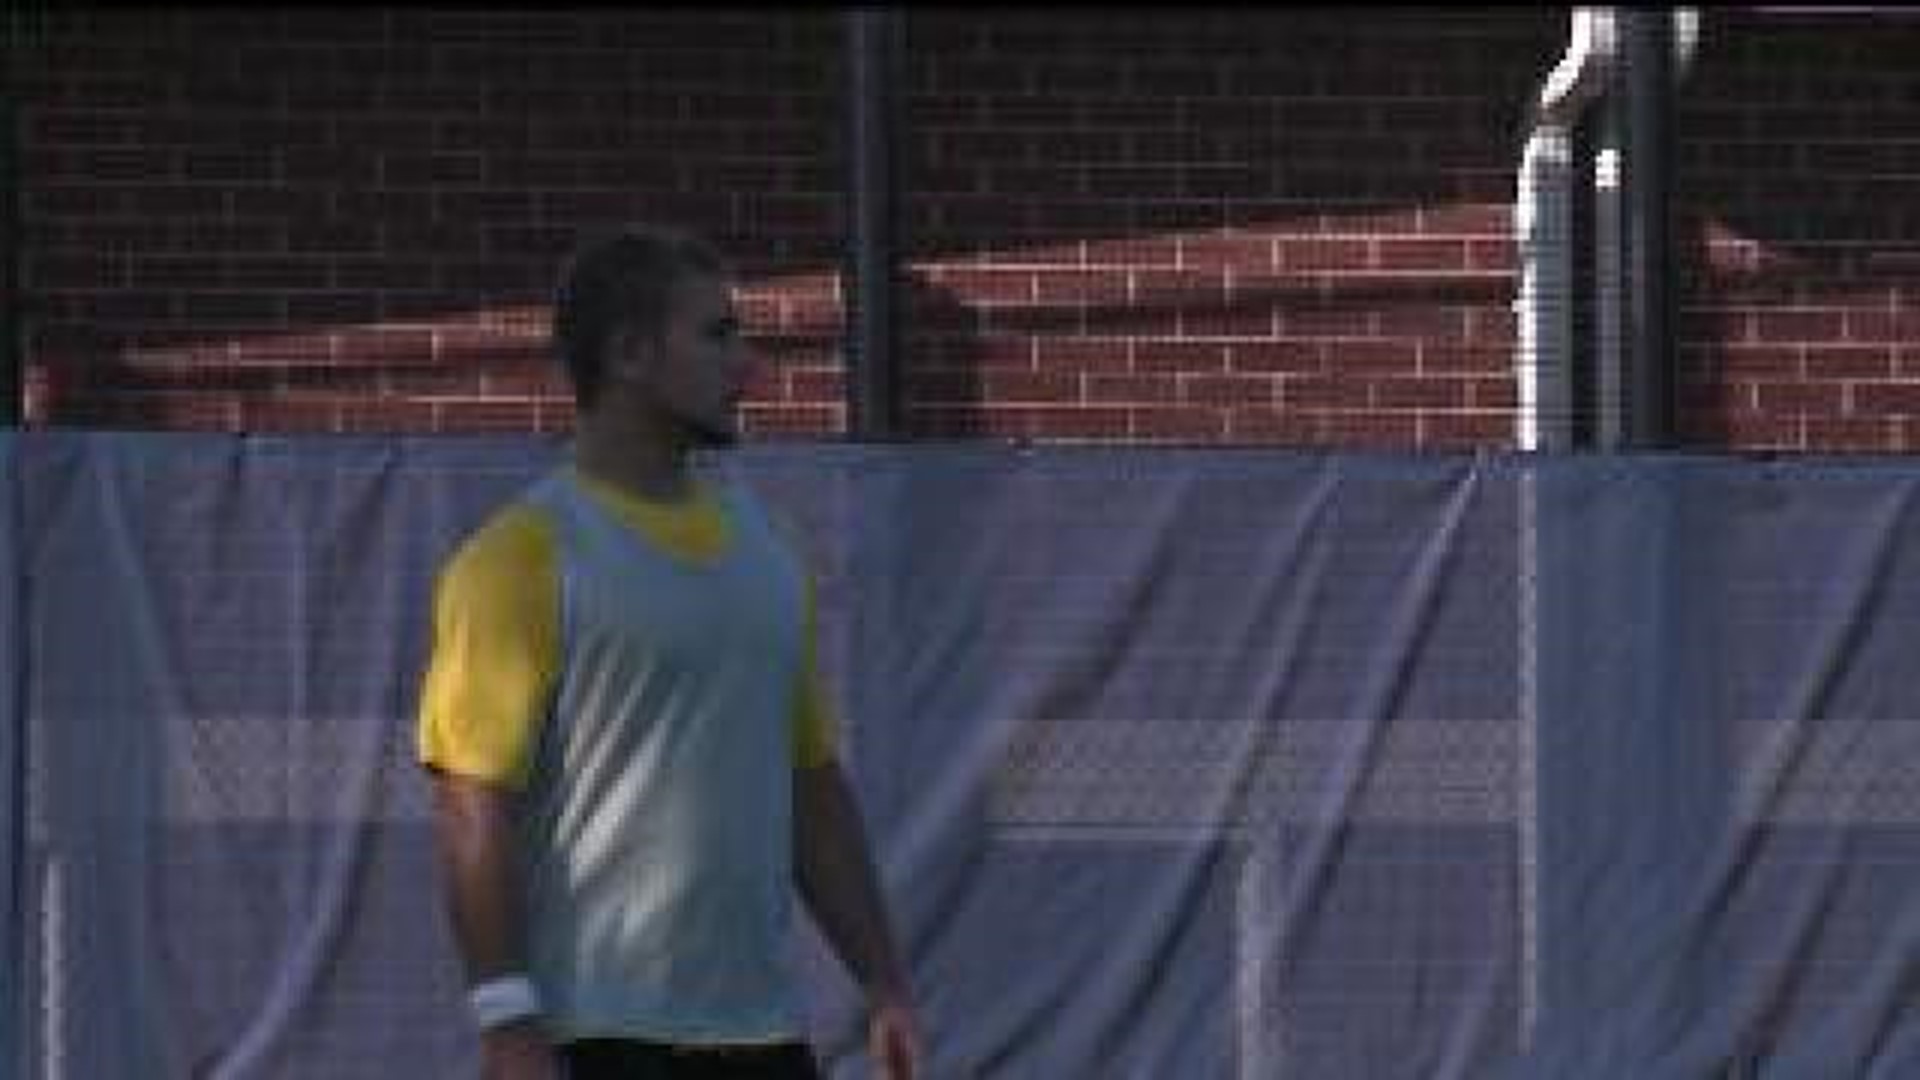 Augie Soccer Player Driving to Bring New Idea to Campus